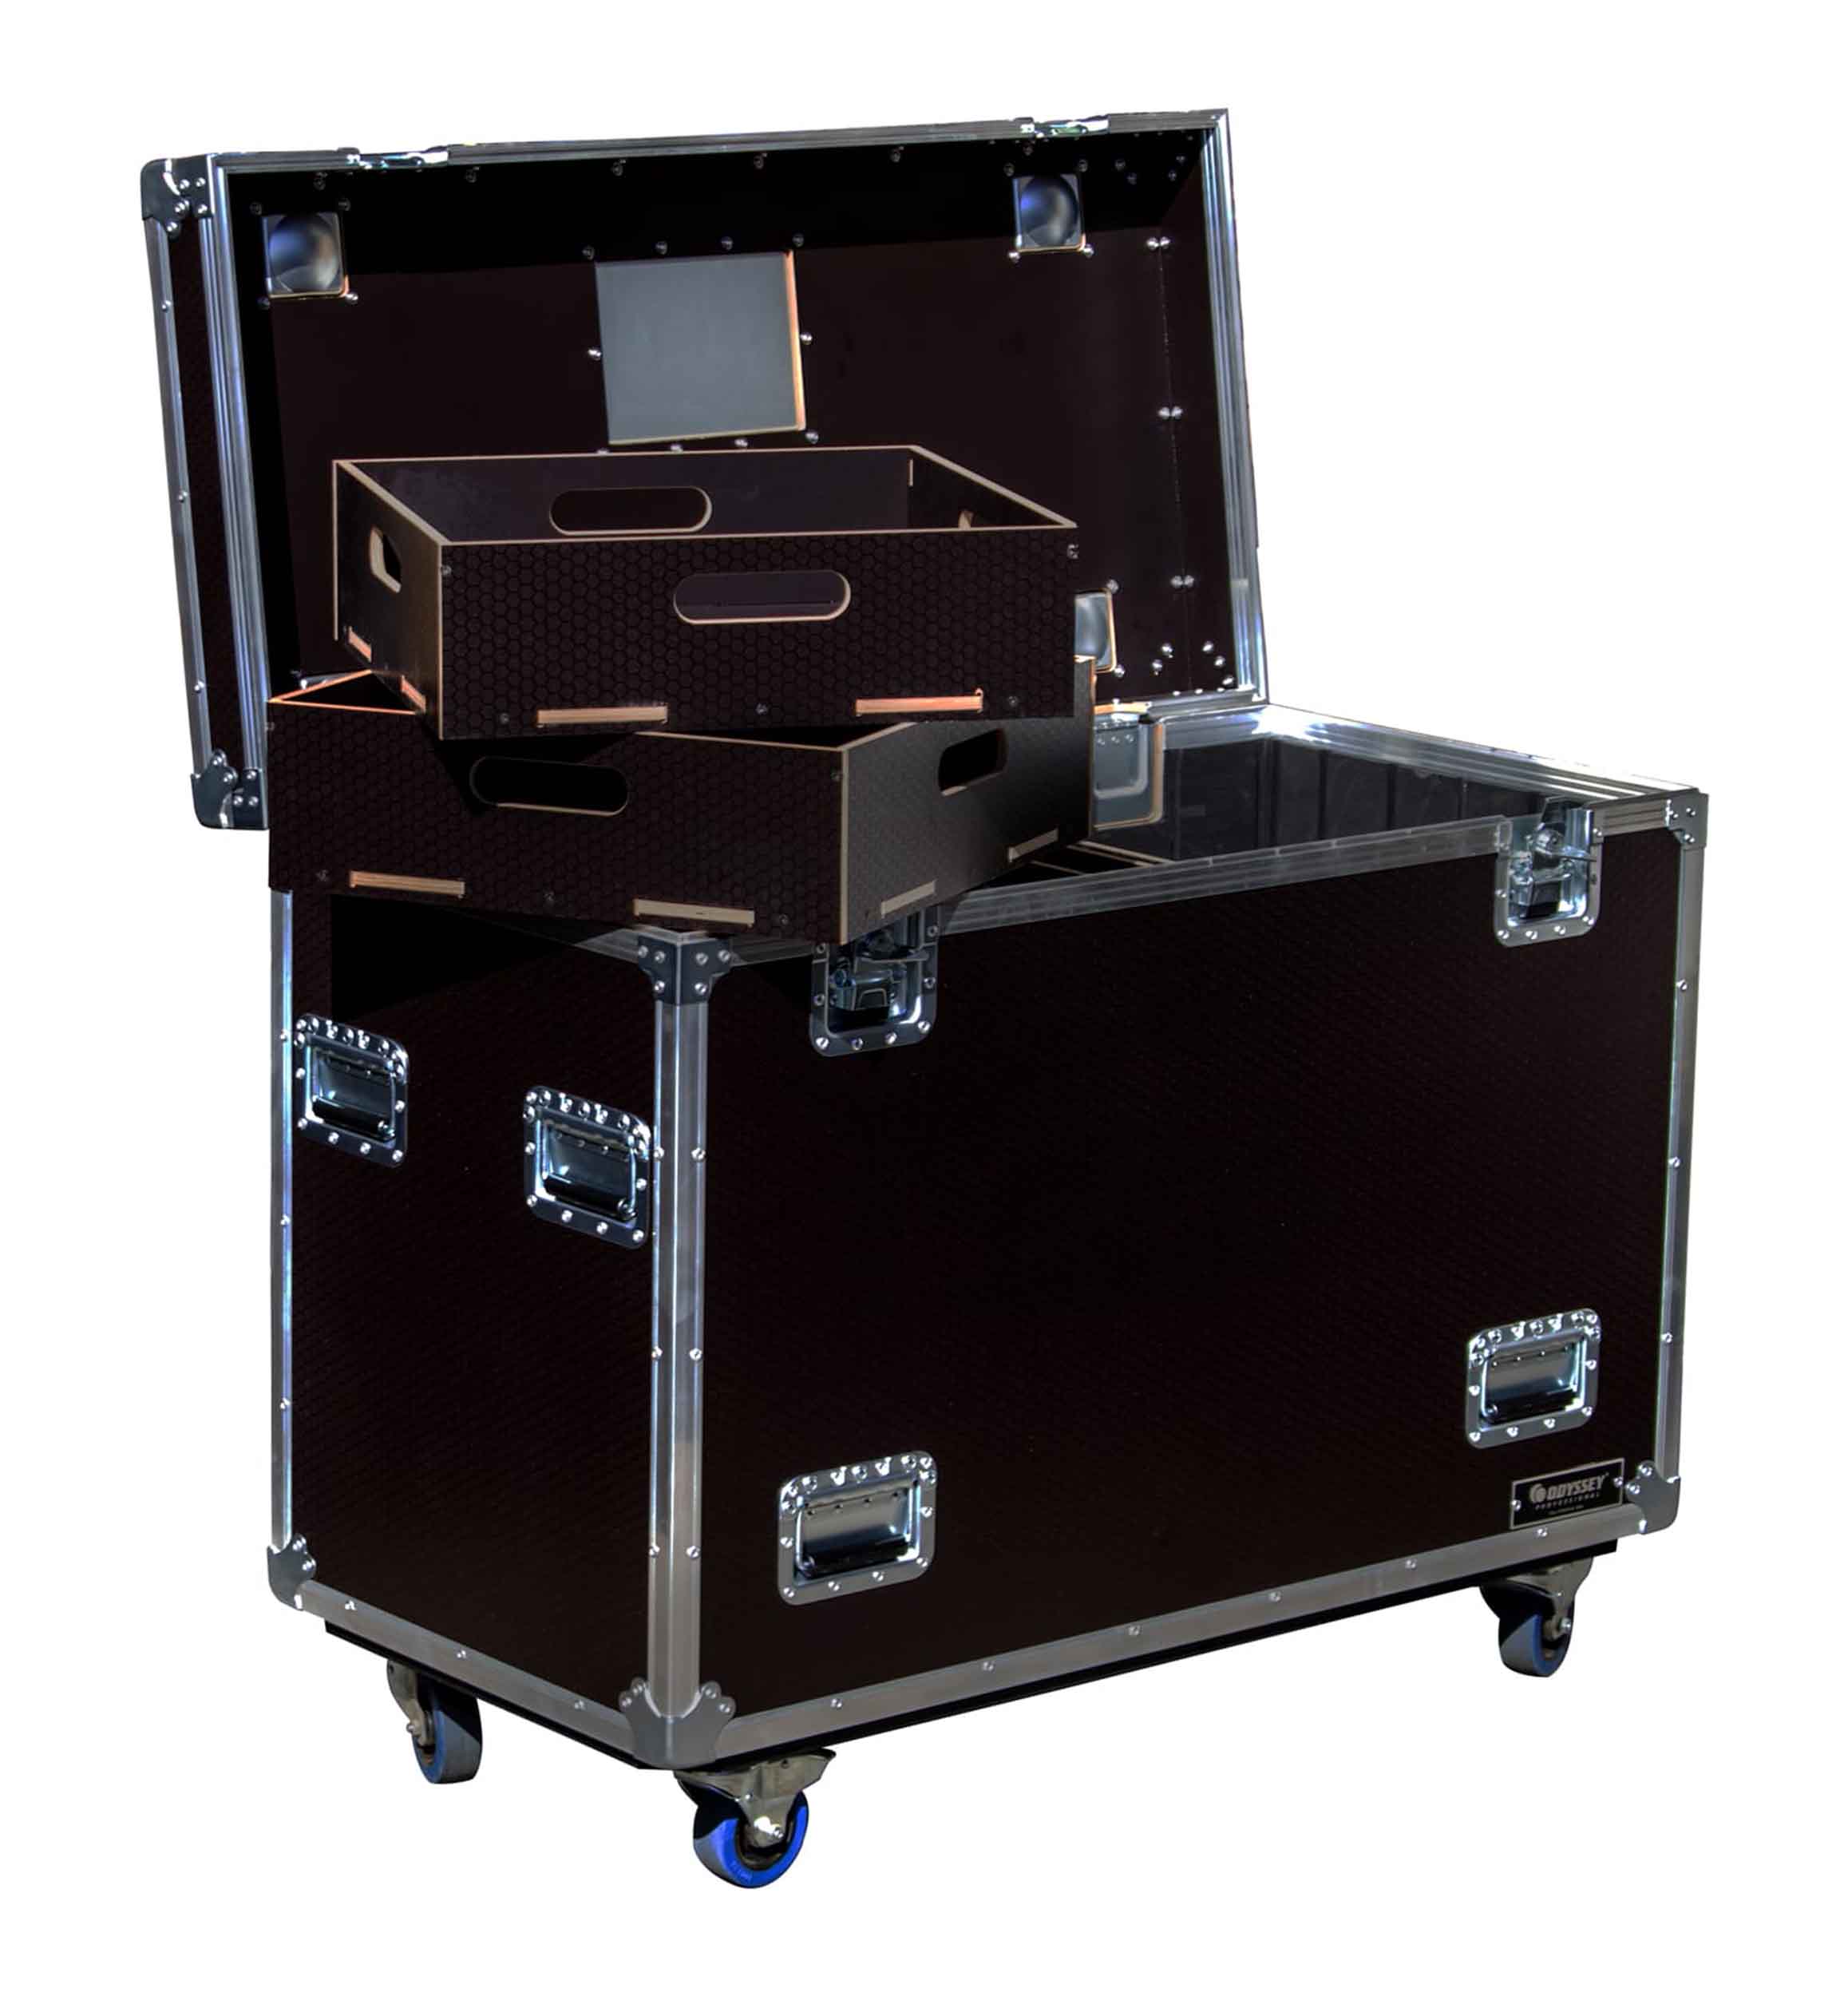 Odyssey OPT452236WBRN, Professional Brown Hex Board Utility Tour Trunk Case with Caster Wheels by Odyssey